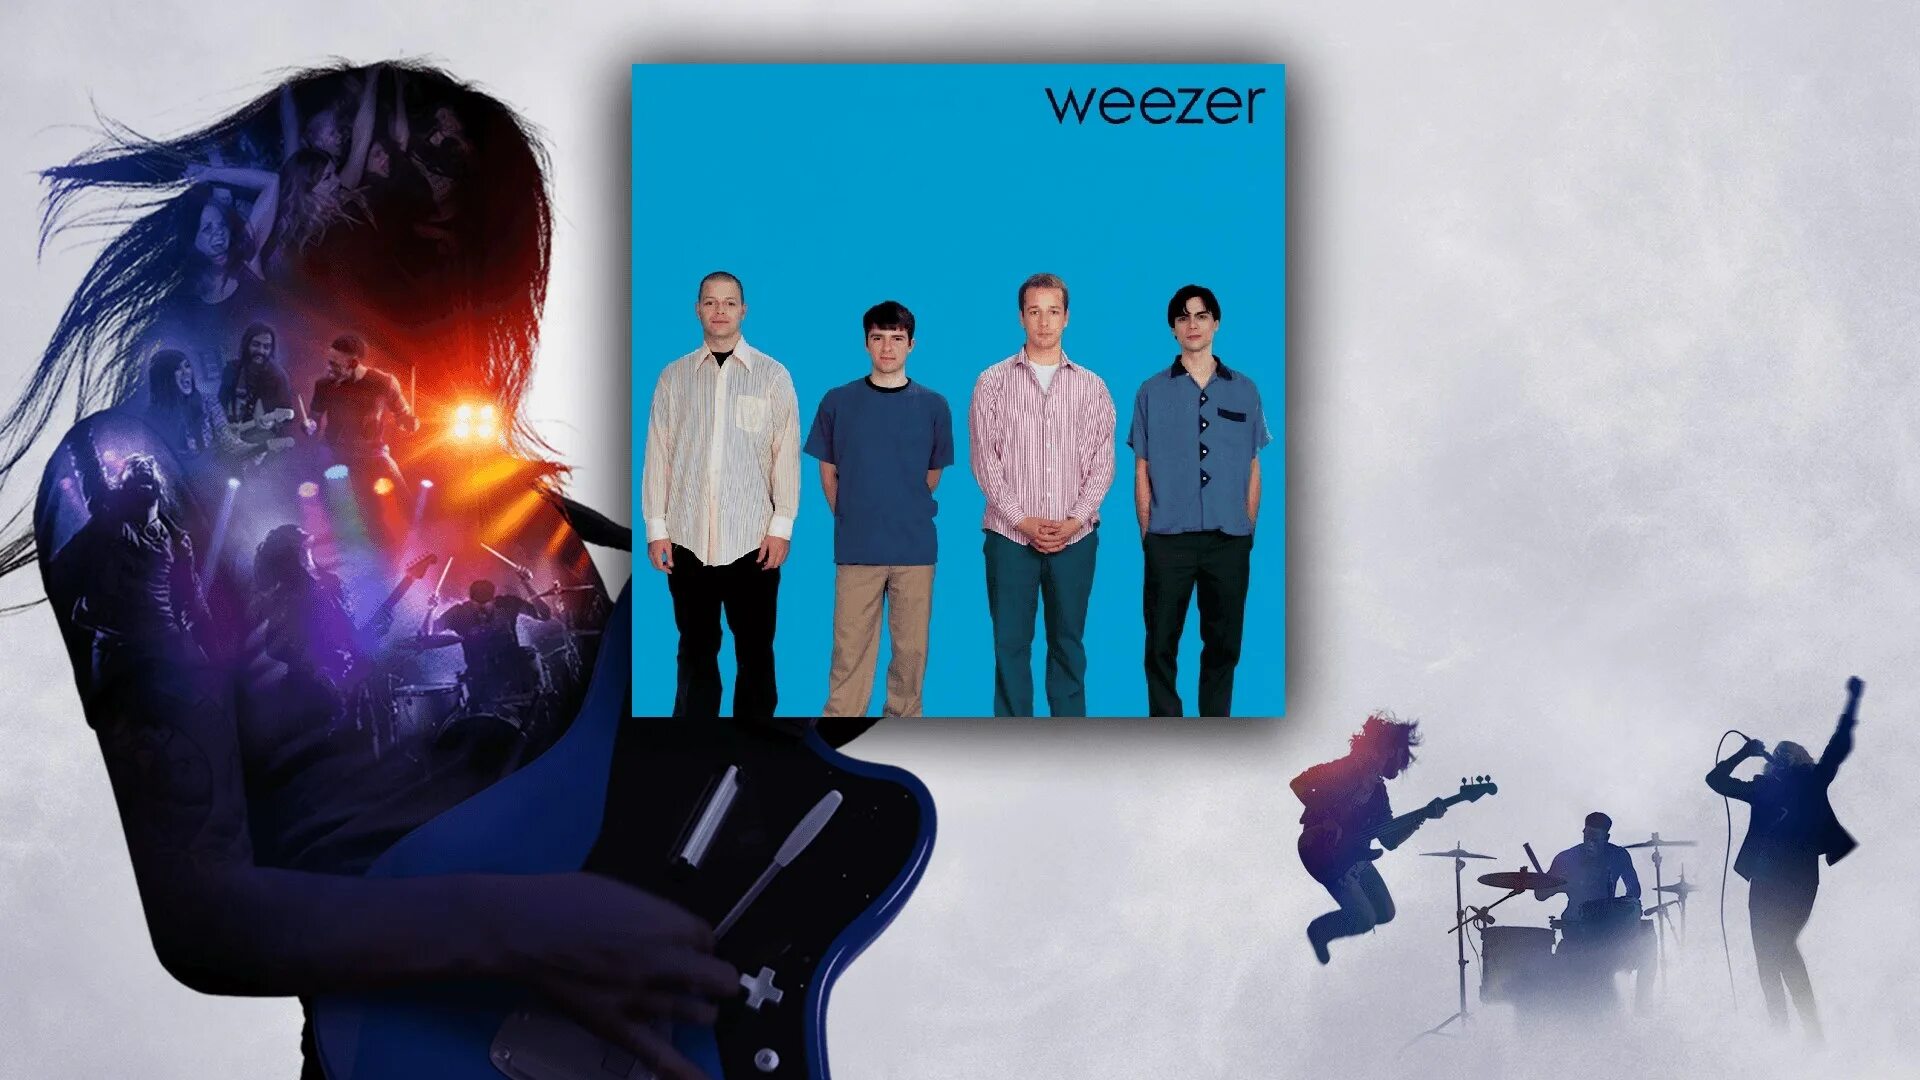 Weezer. Say it aint so. Say Ain't so. Say it! - KILLFI $H. Say it discover